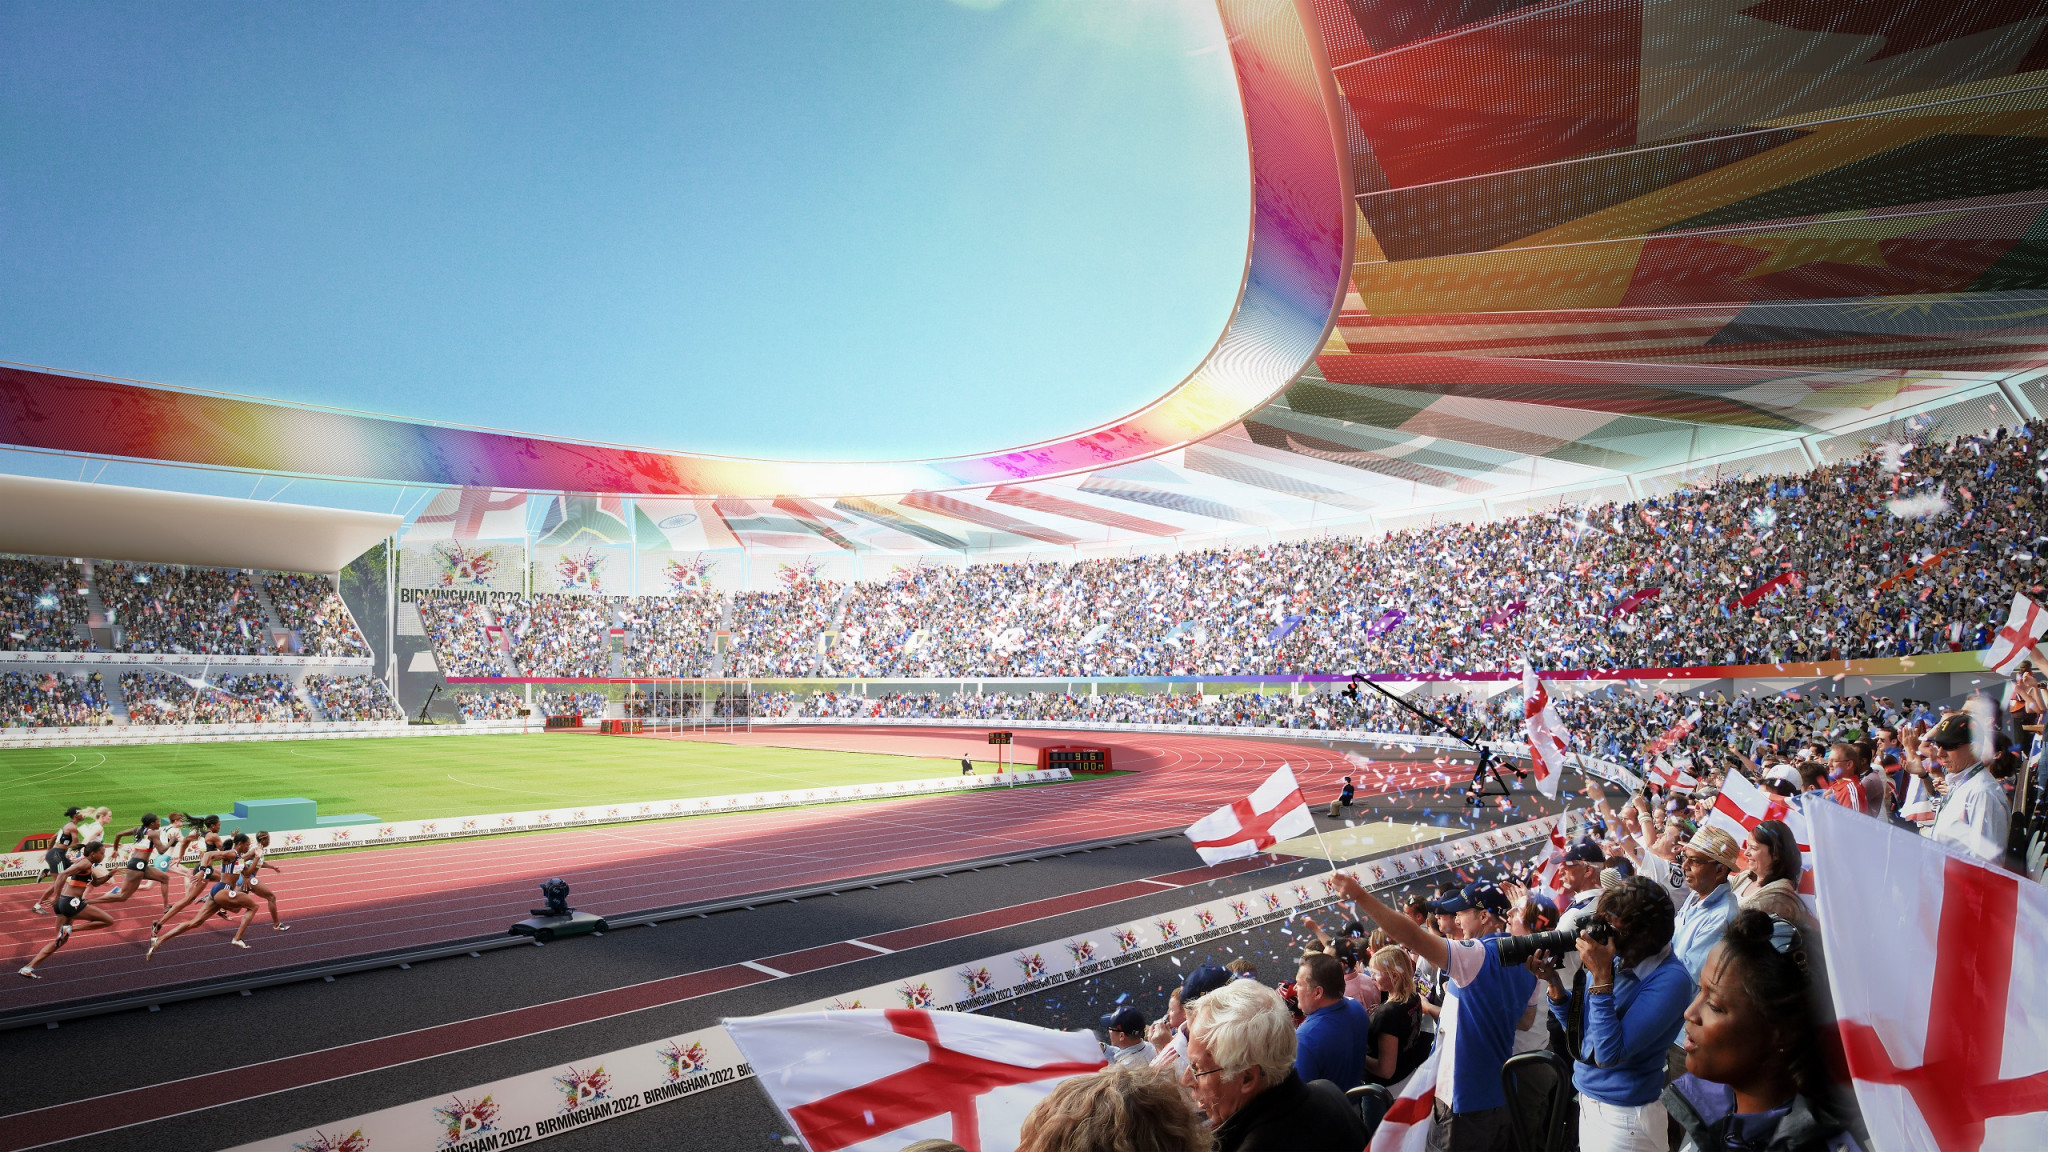 Birmingham 2022 ask for public input on Commonwealth Games